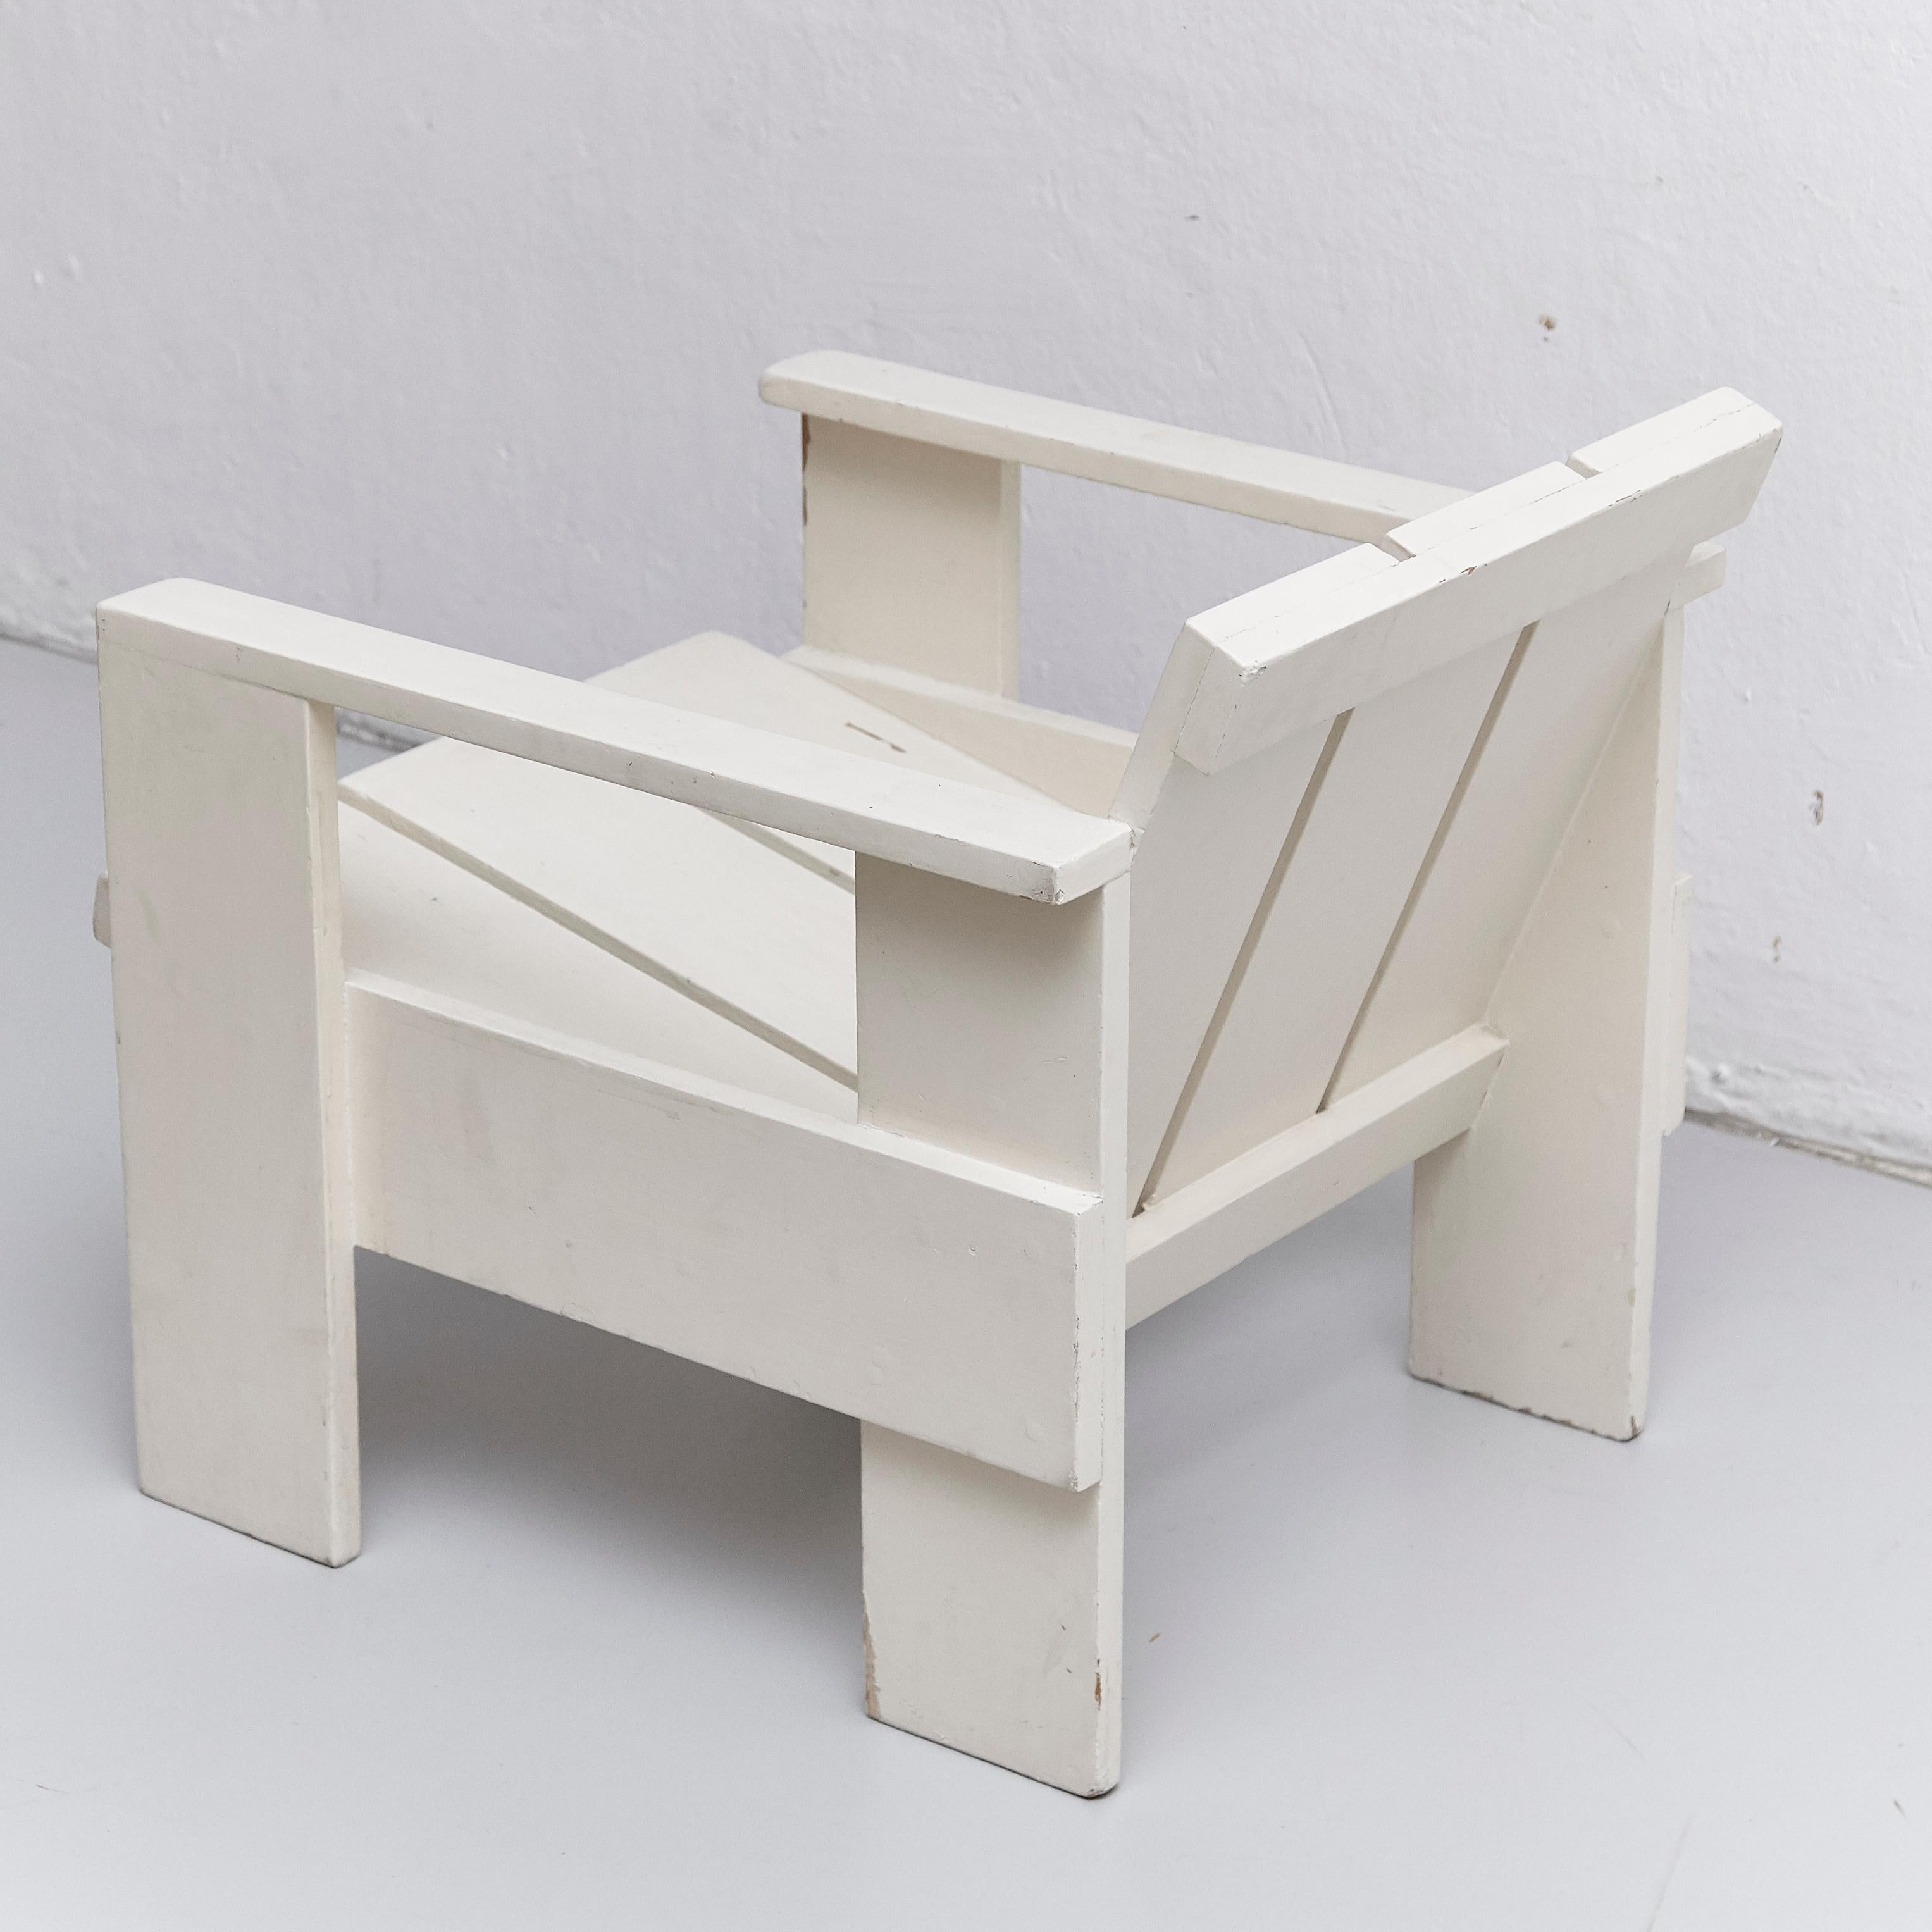 Mid-20th Century After Gerrit Rietveld Mid-Century Modern White Wood Crate Chair, circa 1950